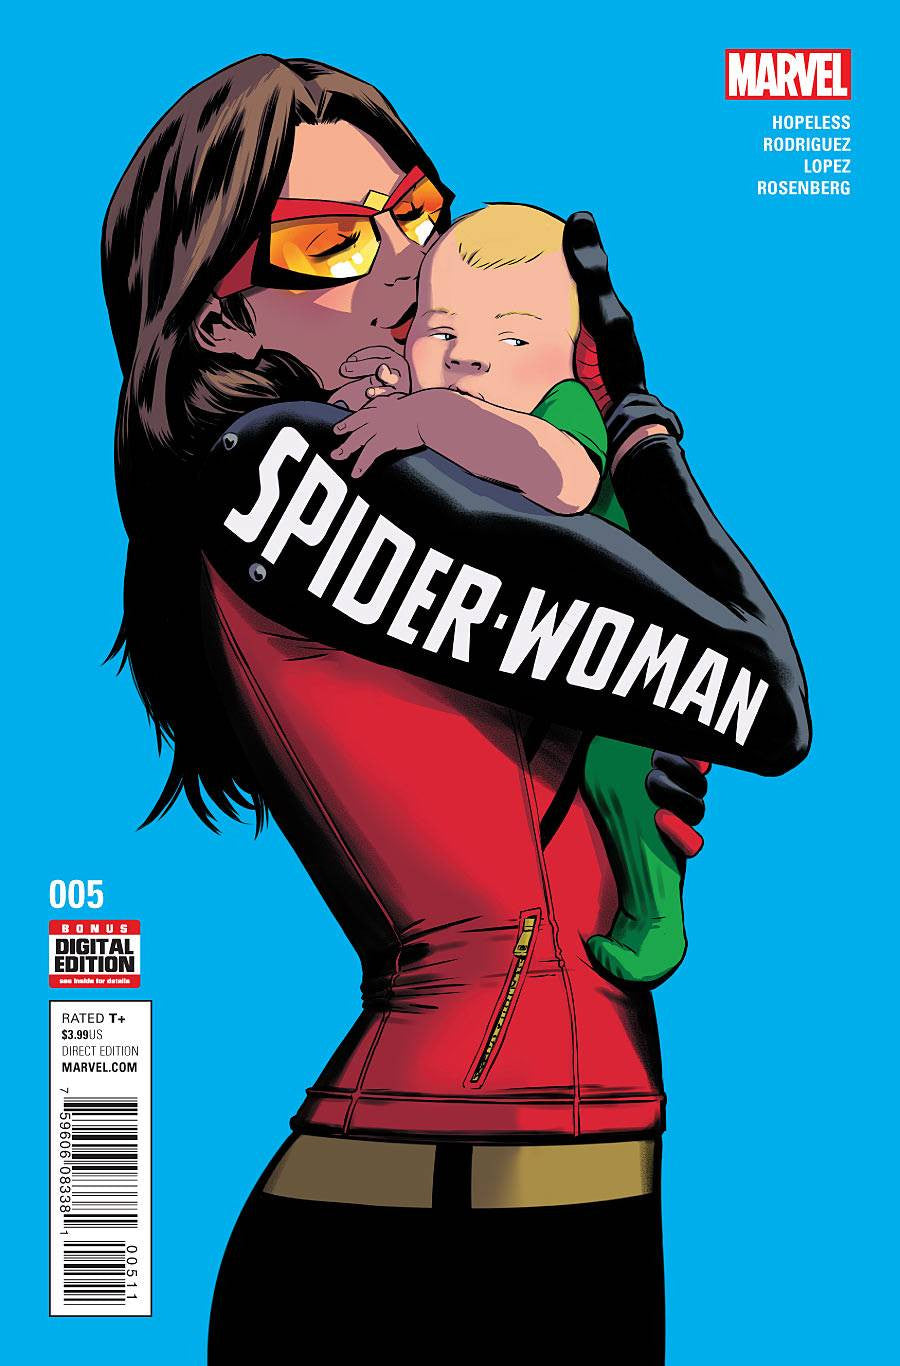 SPIDER-WOMAN #5 COVER